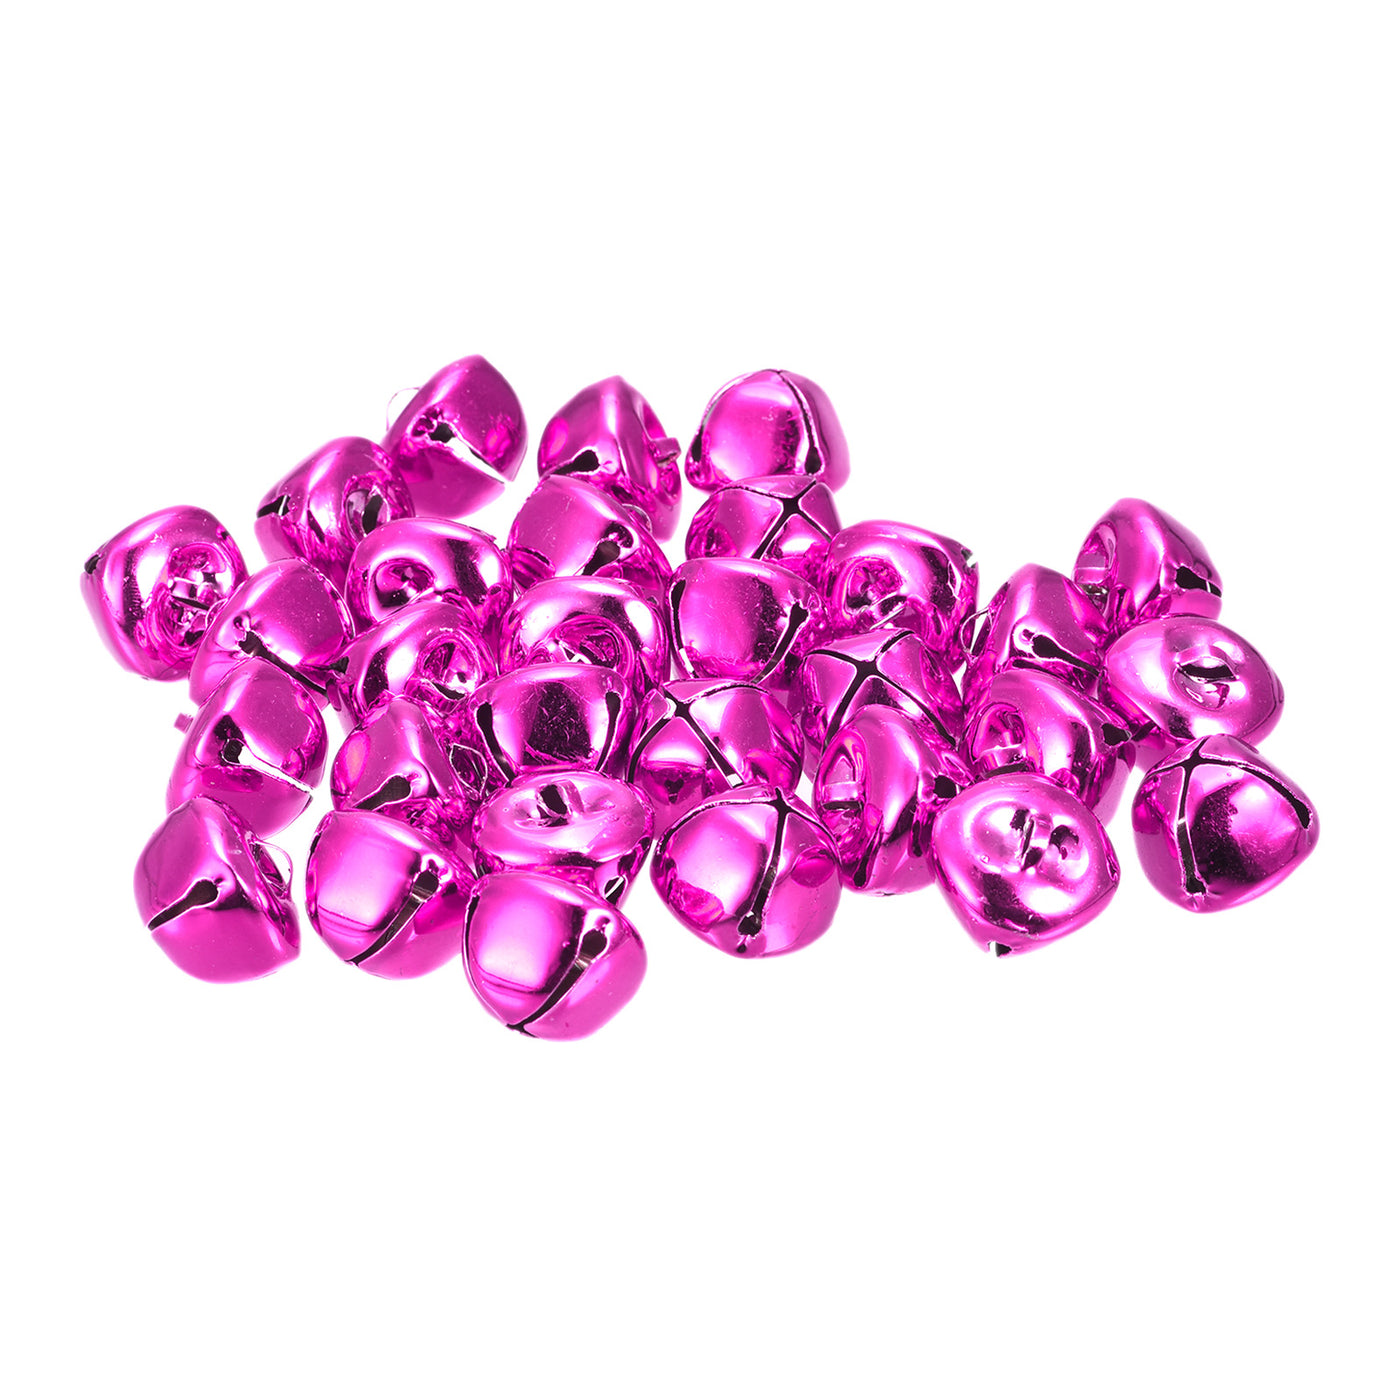 Uxcell Uxcell Jingle Bells, 20mm 48pcs Carbon Steel Craft Bells for DIY Christmas, Rose Red